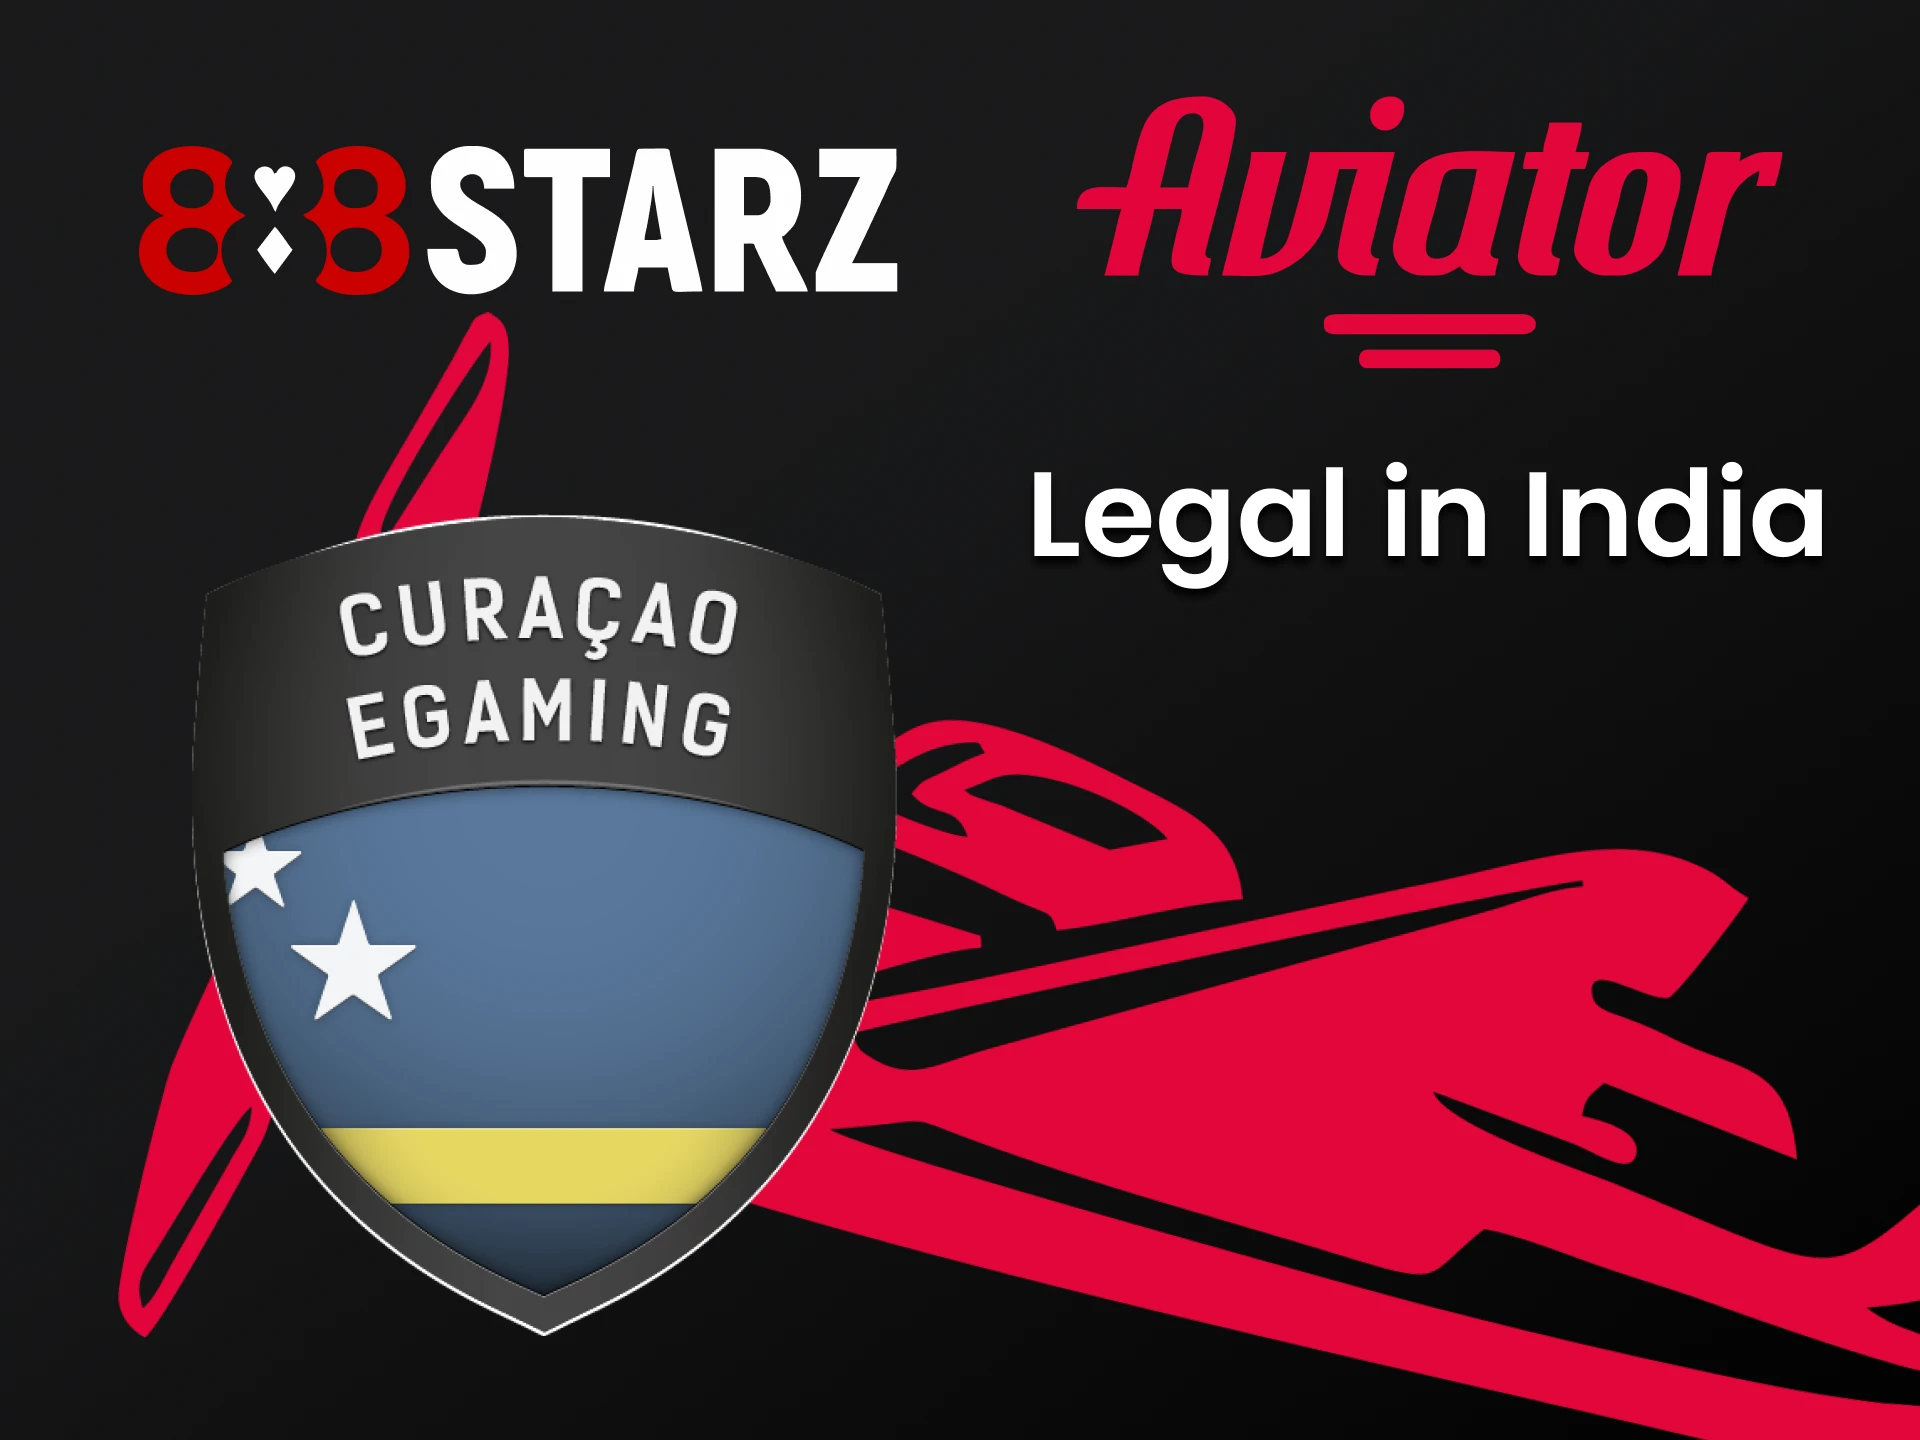 It is legal to play Aviator on 888starz.